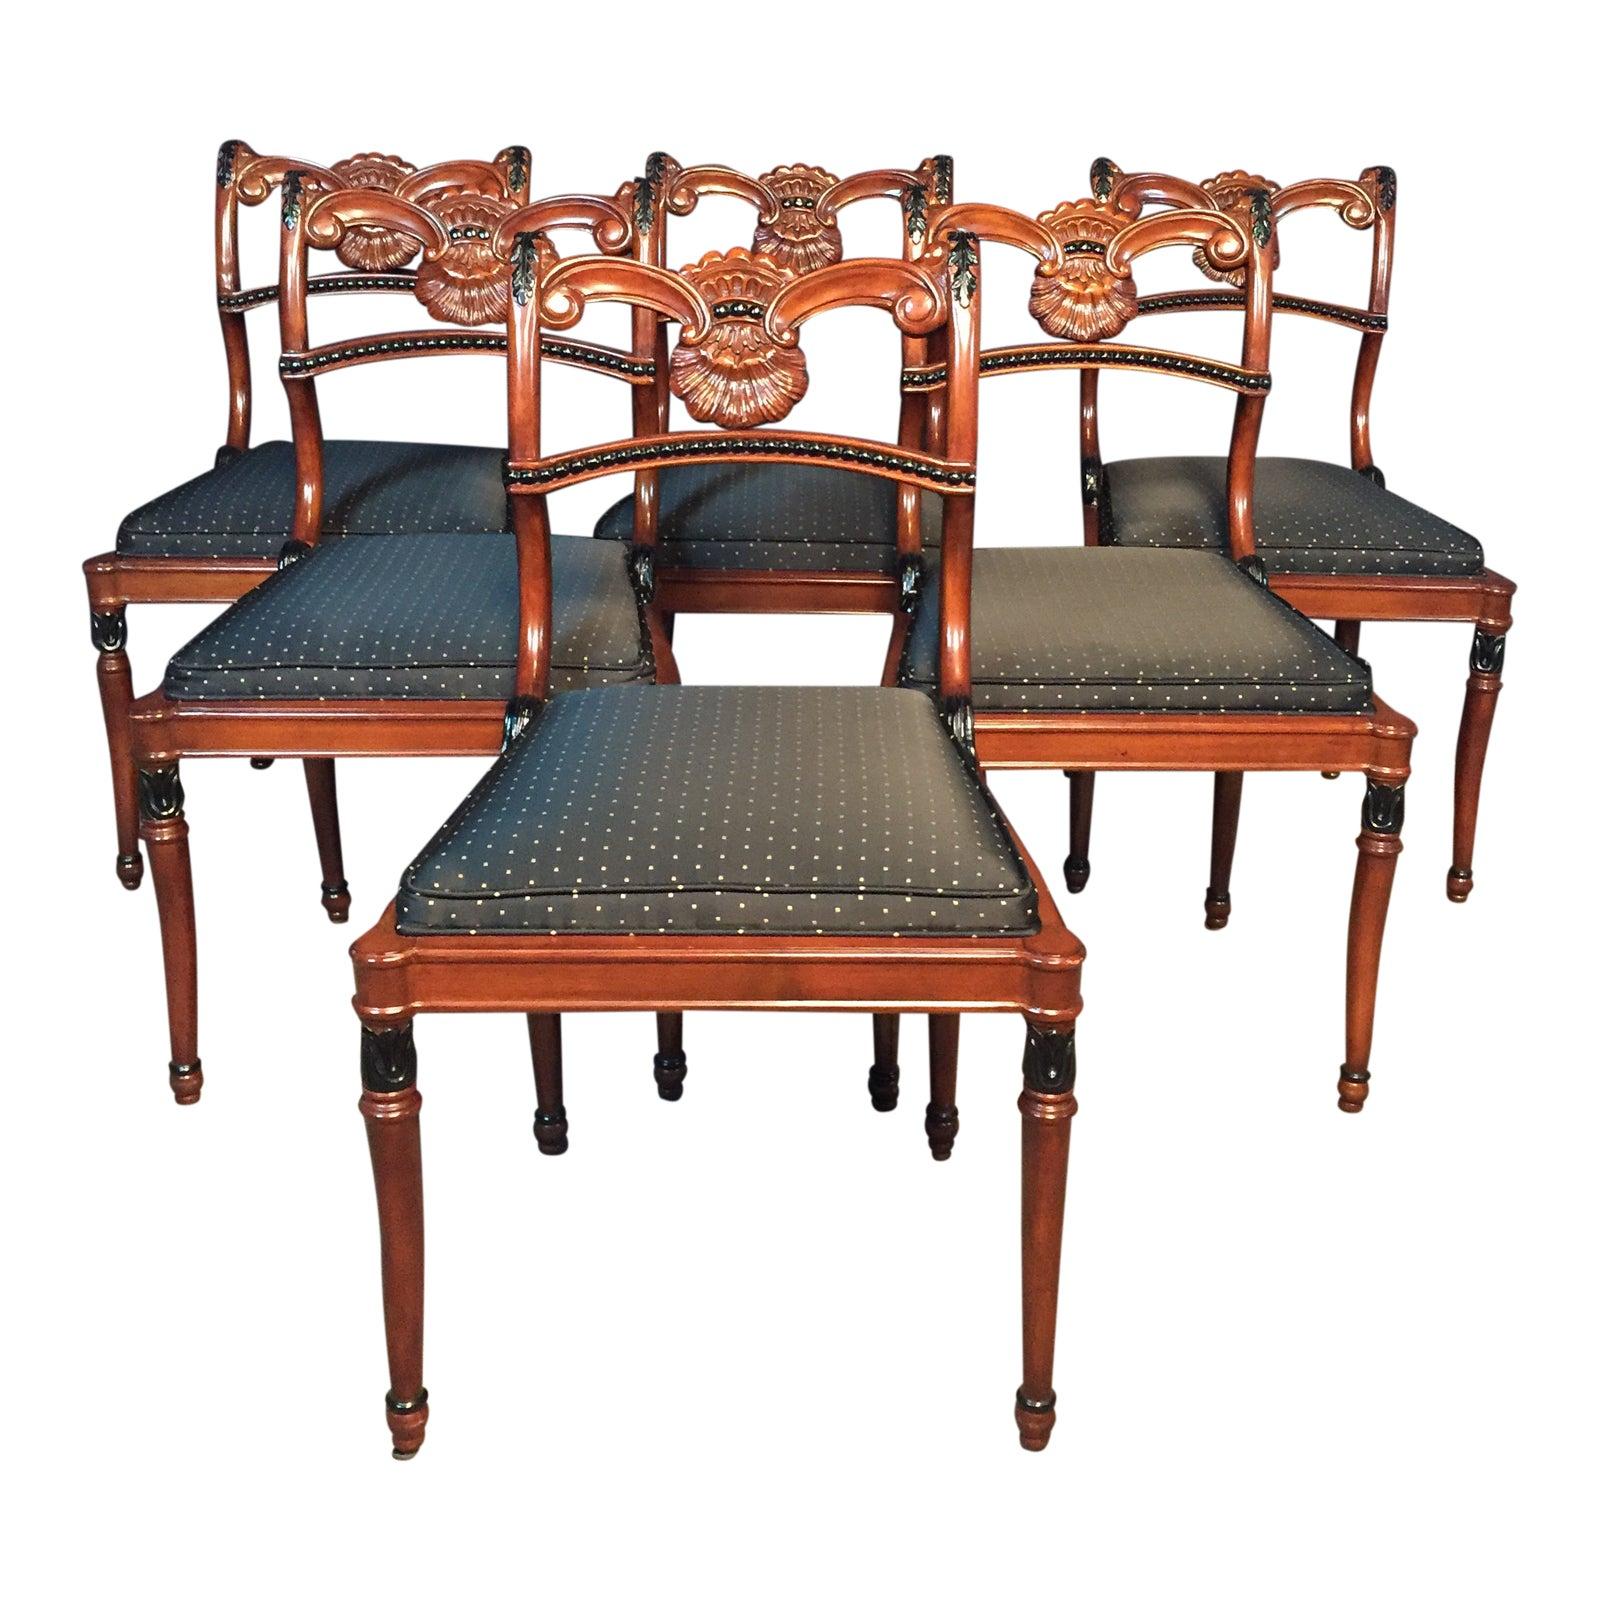 Set of 6 Regency Style Dining Room Chairs